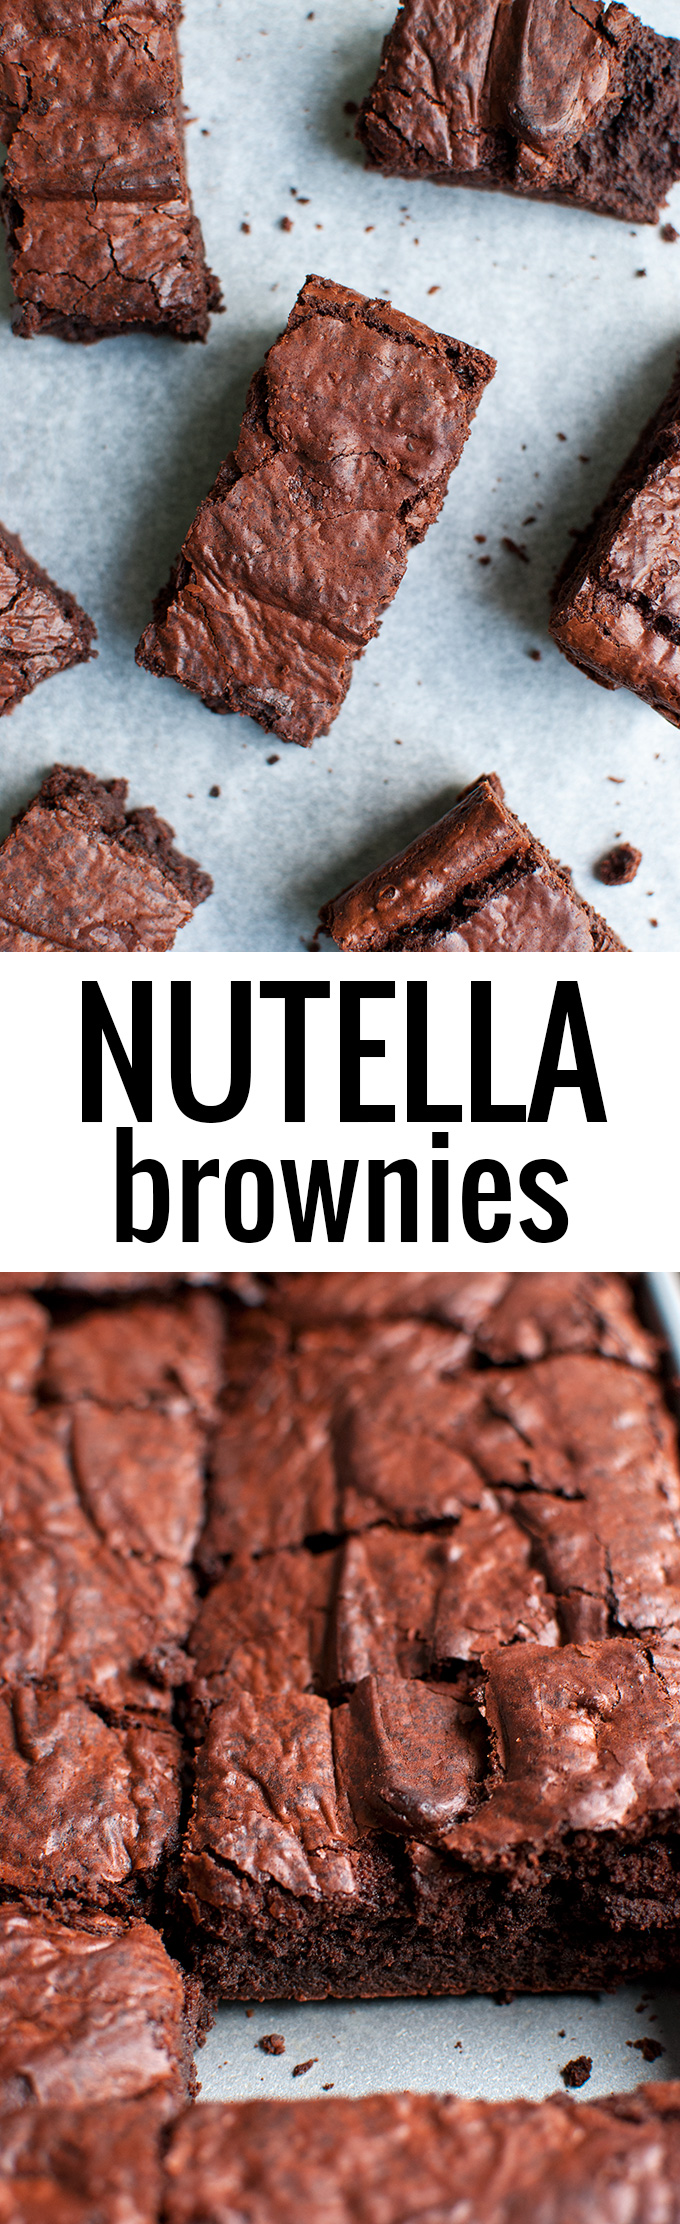 Nutella Brownies | These super fudgy brownies are made with bittersweet chocolate and Nutella. They are sooo good! | thetoughcookie.com